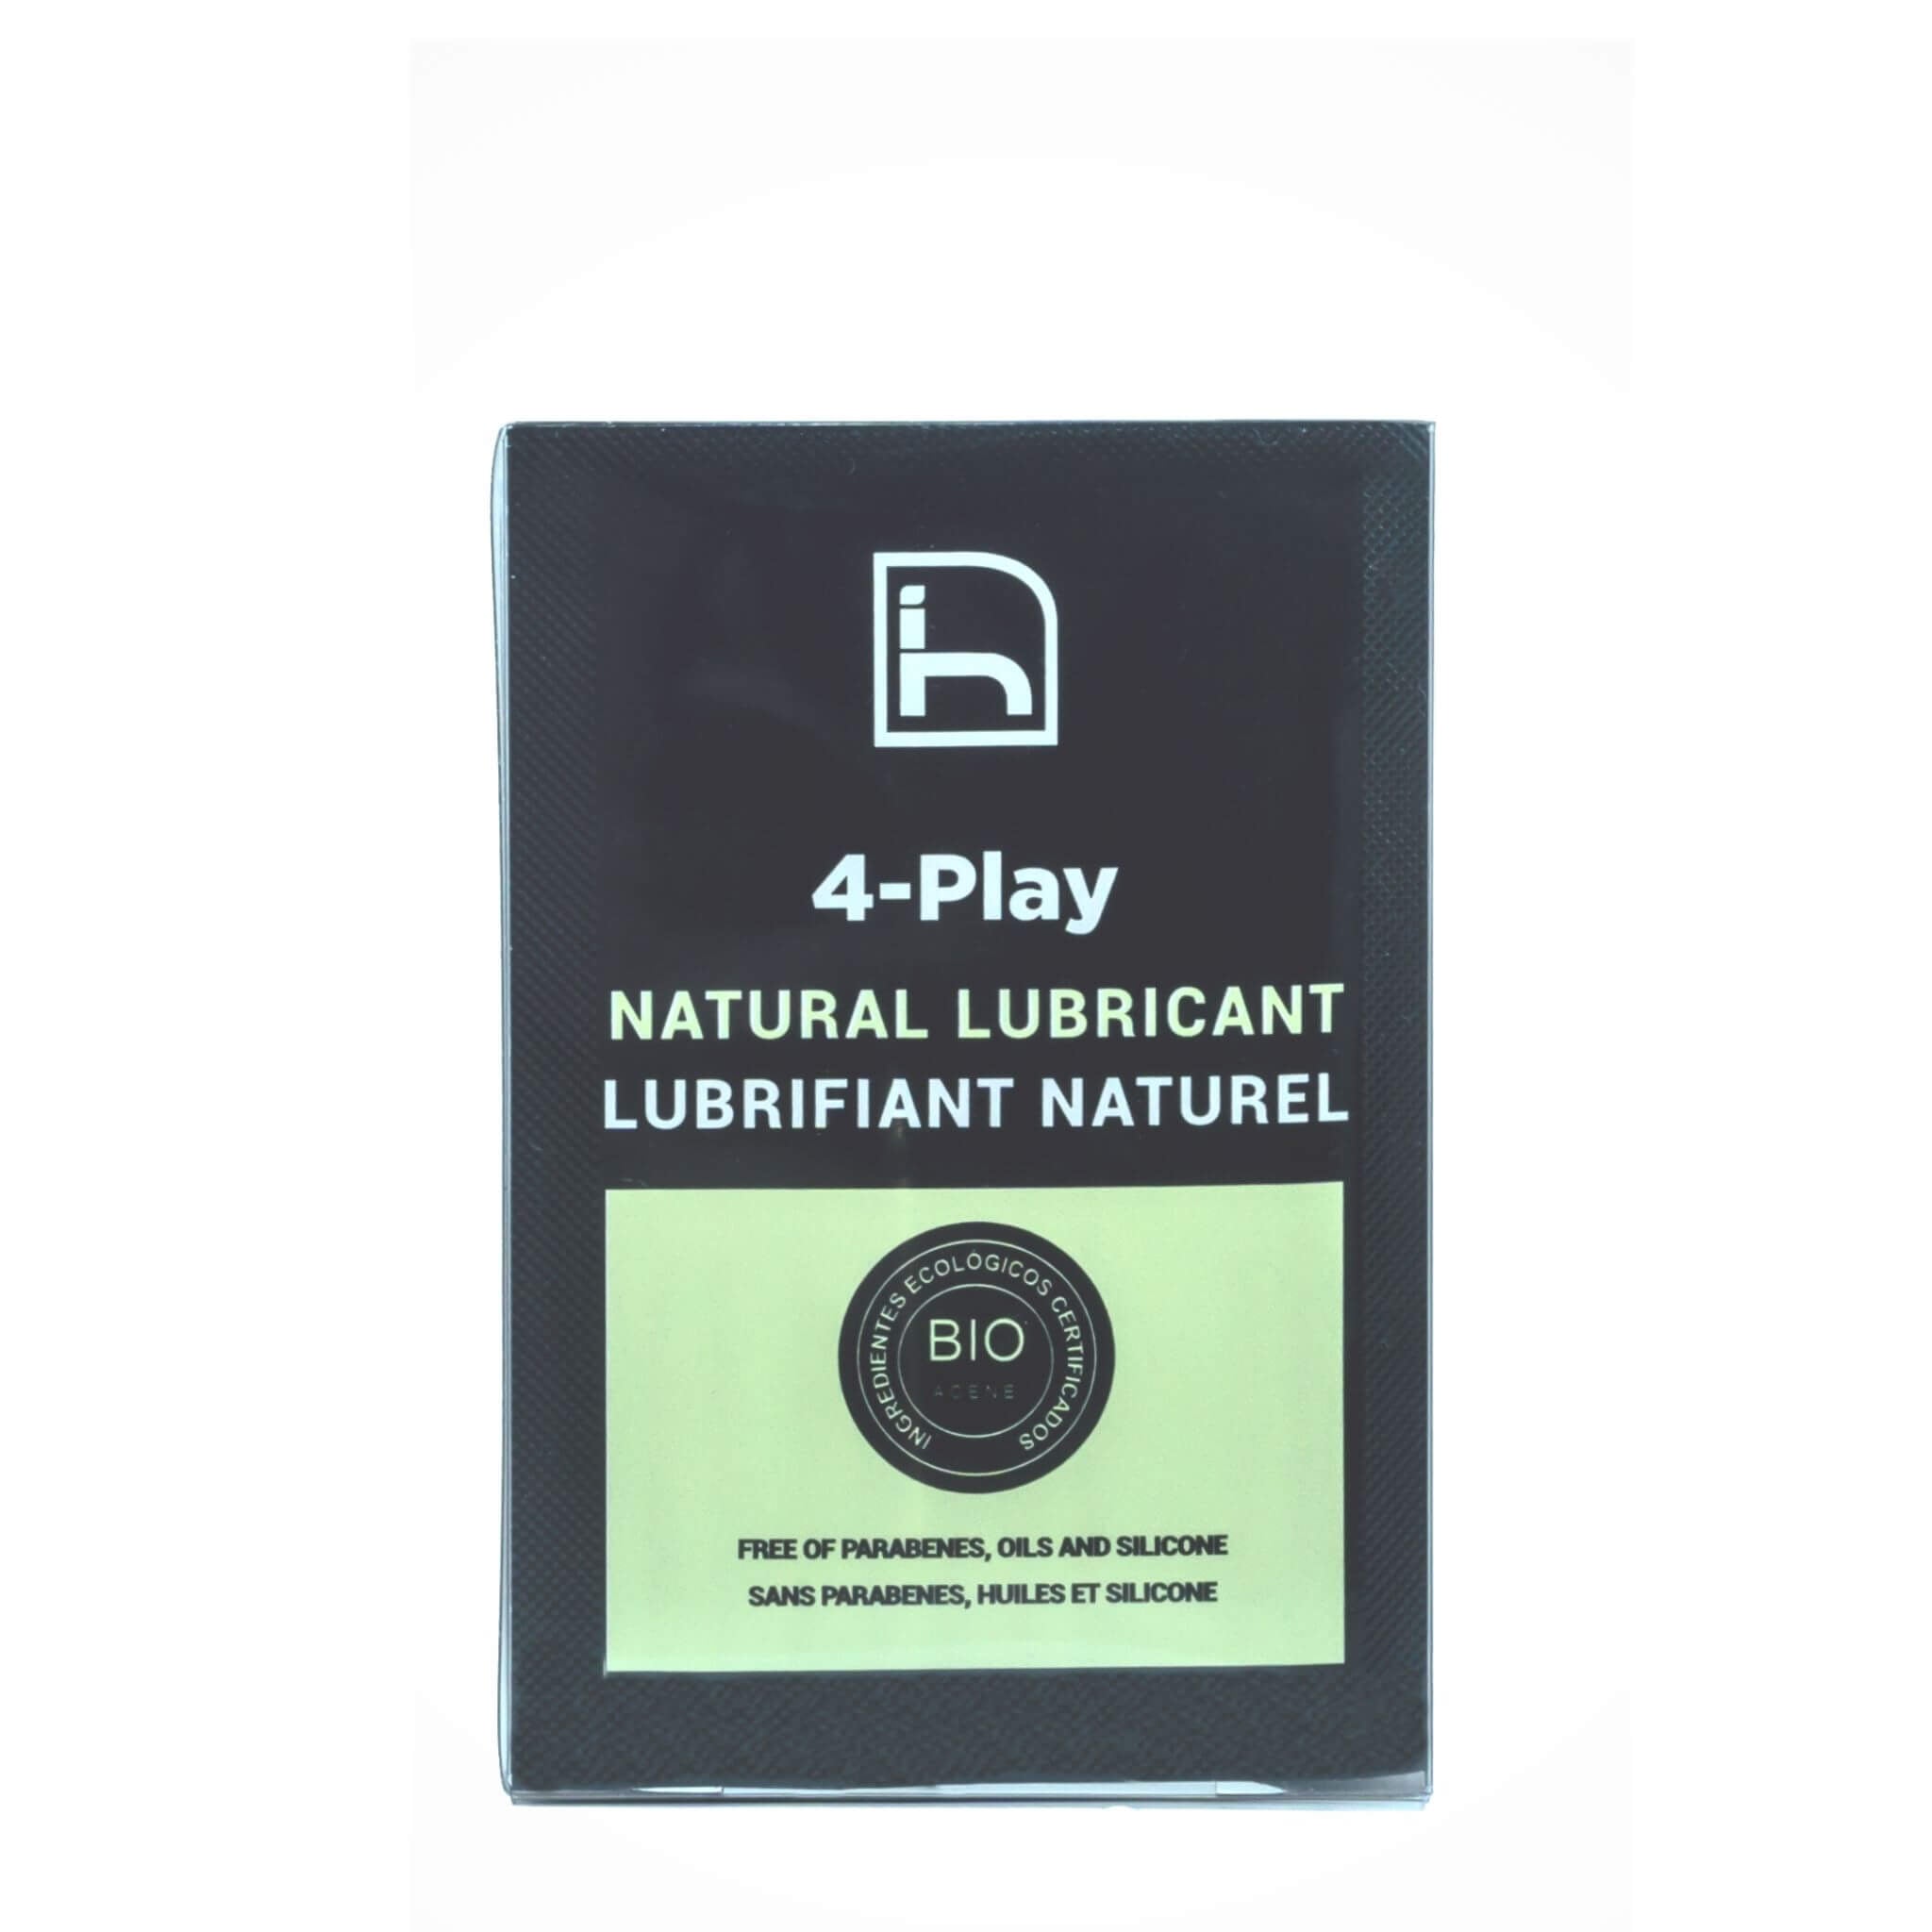 Natural water-based lubricant in single doses. Silicone-free. Without parabens. Ecological and vegan. Organic certificate.